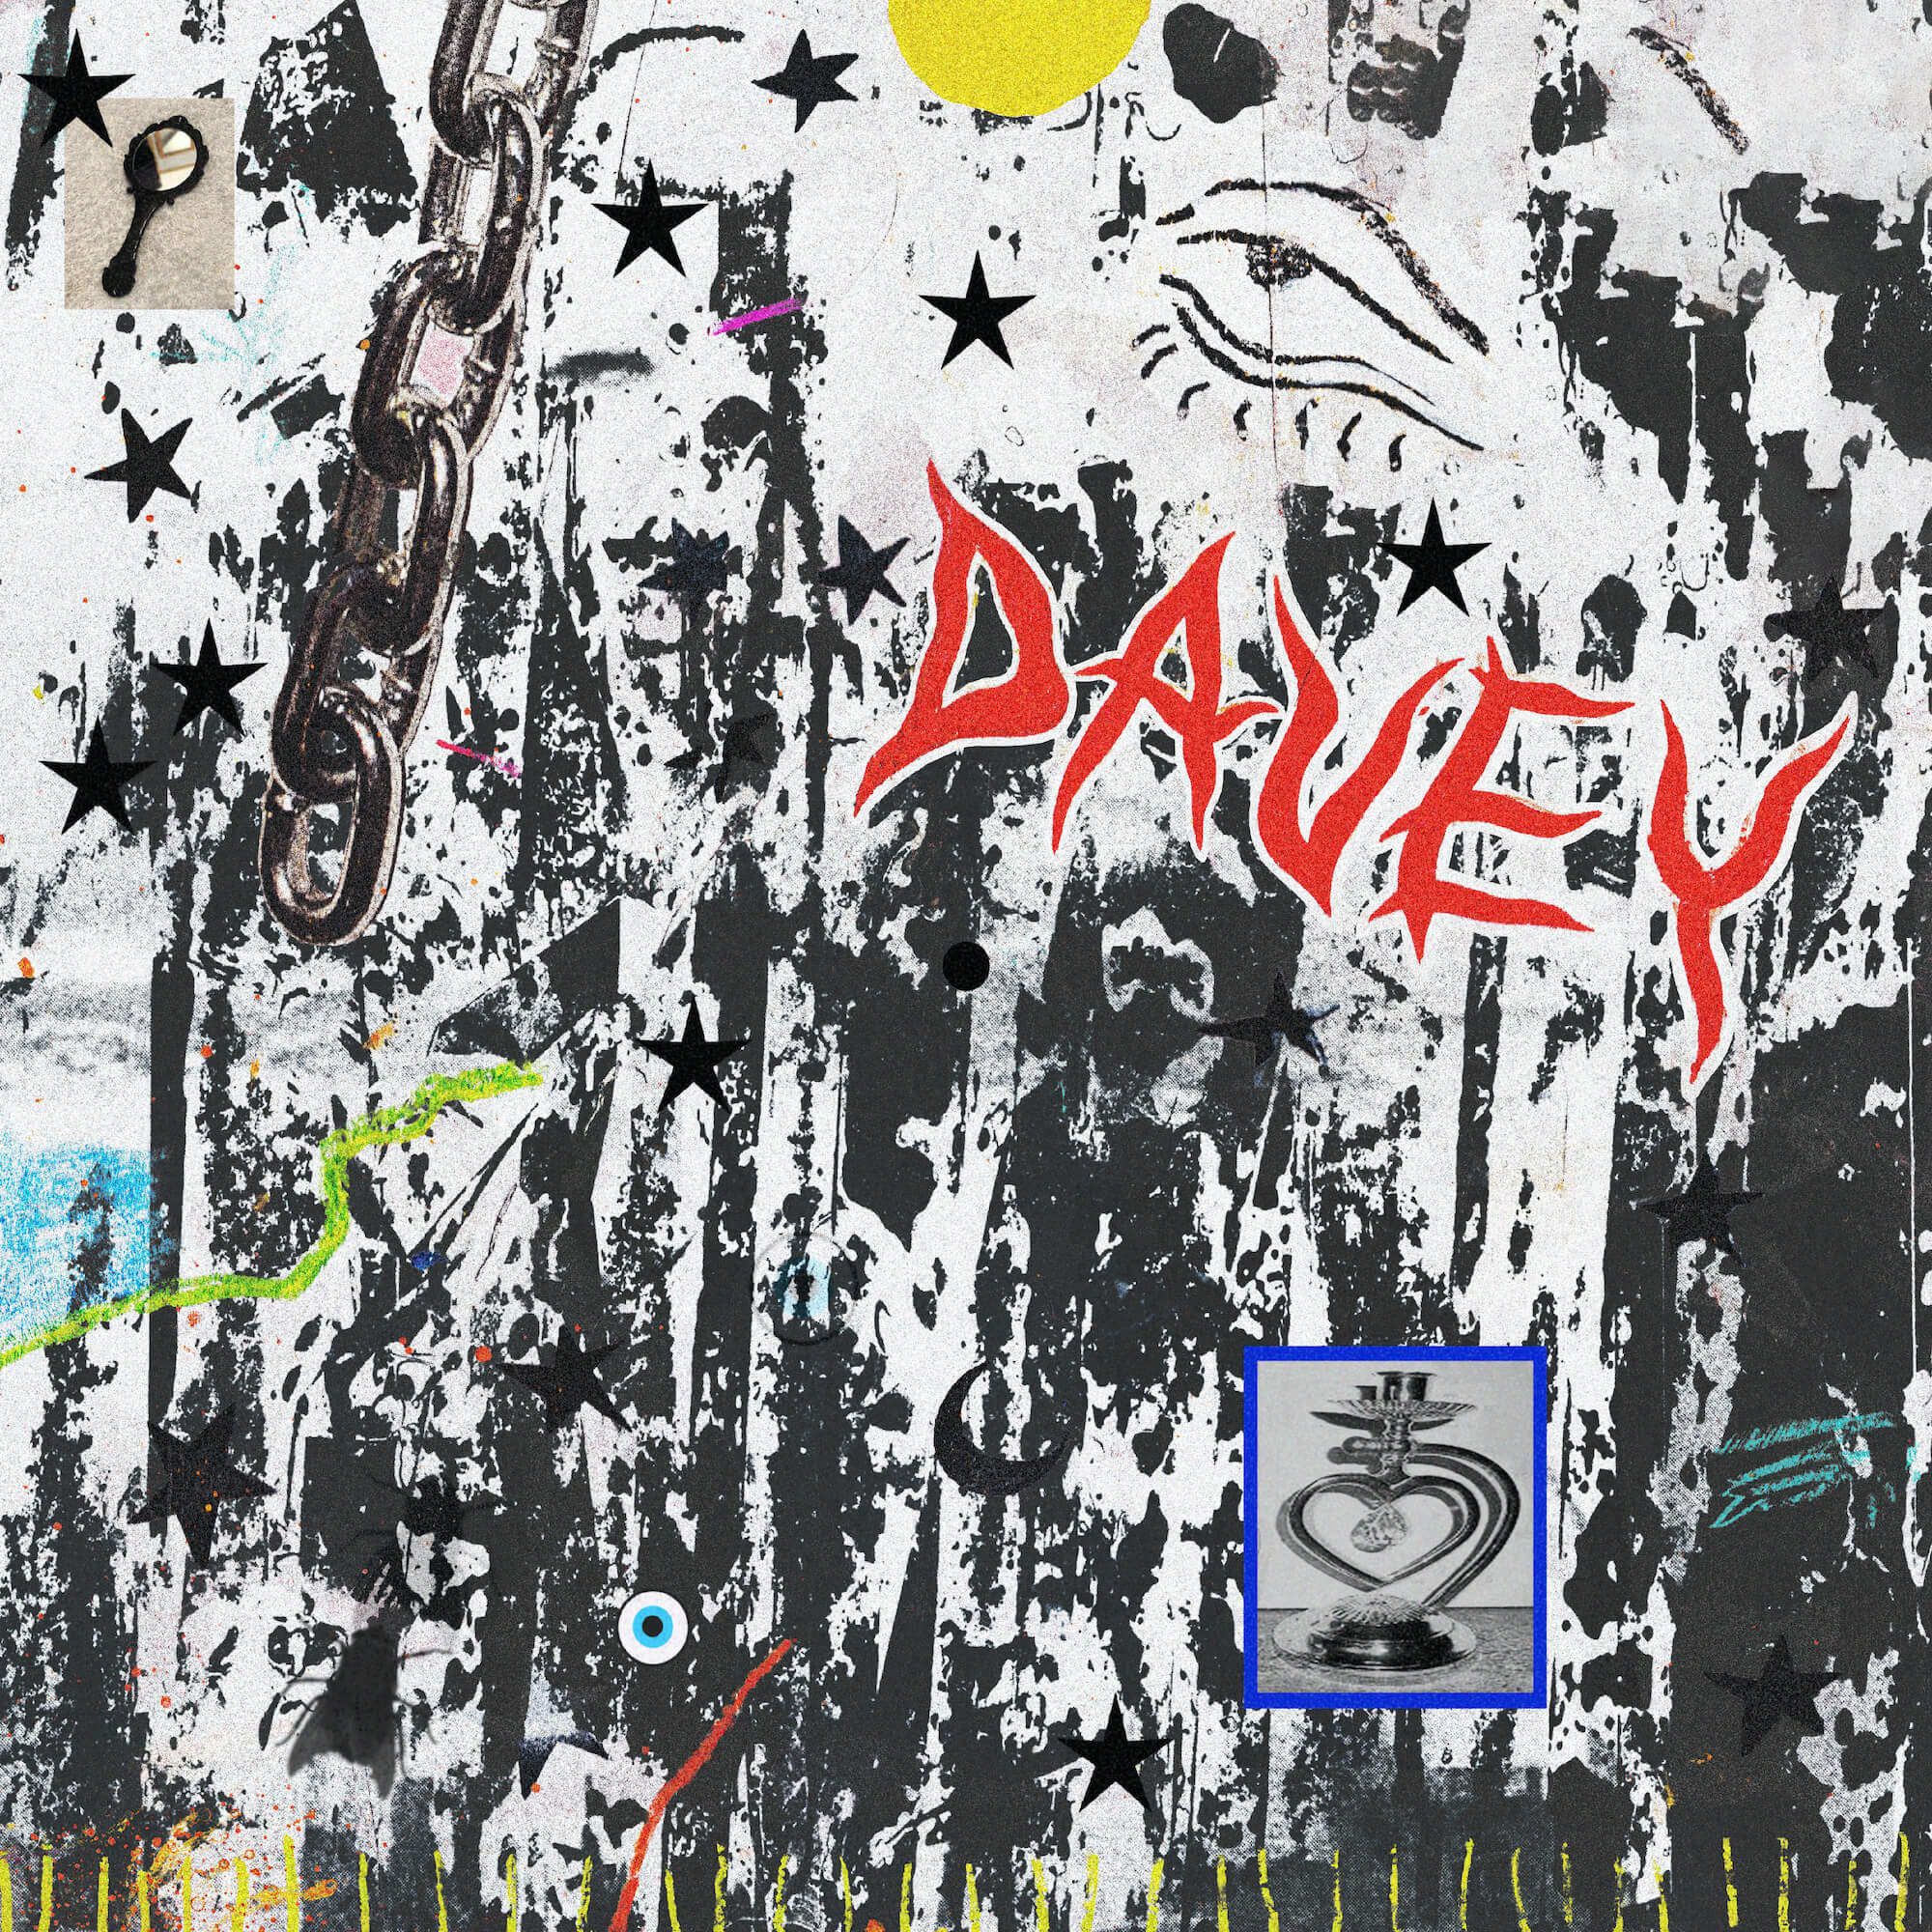 Davey EP by Davey album review by James Olson. The EP is now available via the Orchard and various streaming services